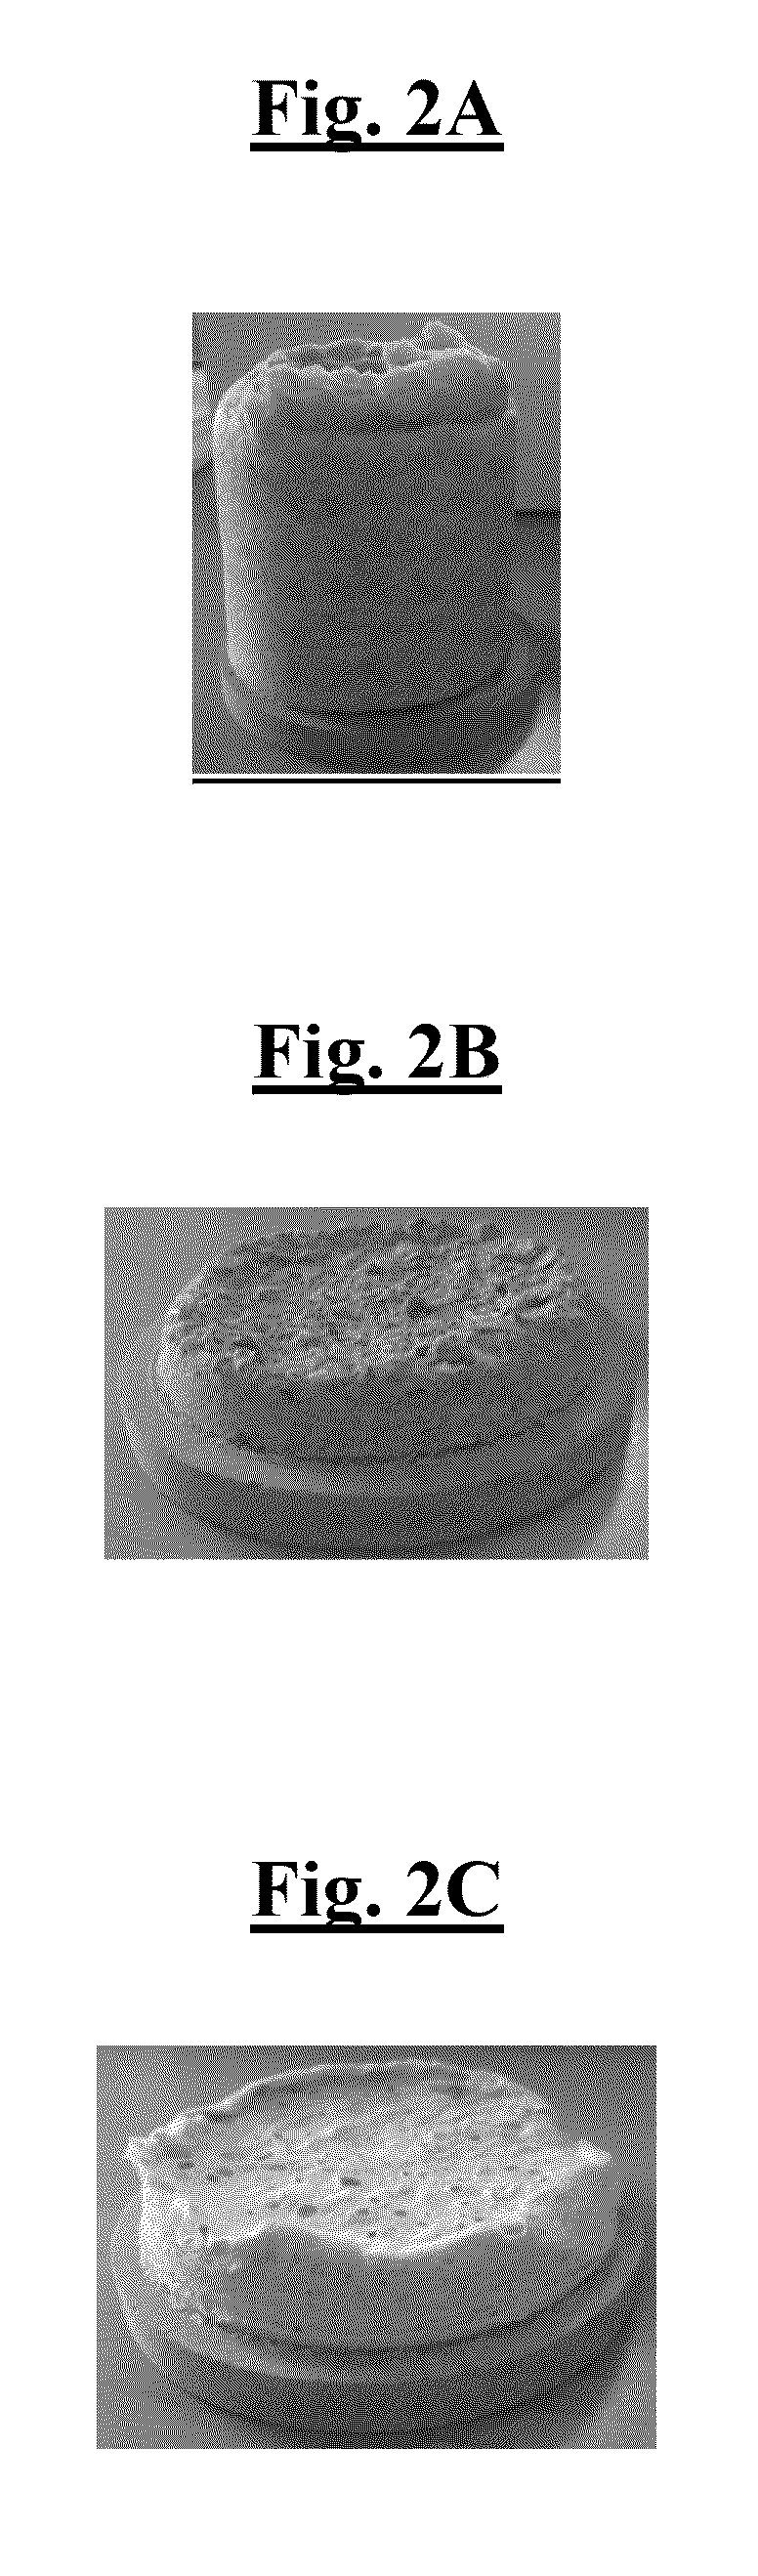 Composition and method for treating subterranean formations using inorganic fibers in injected fluids